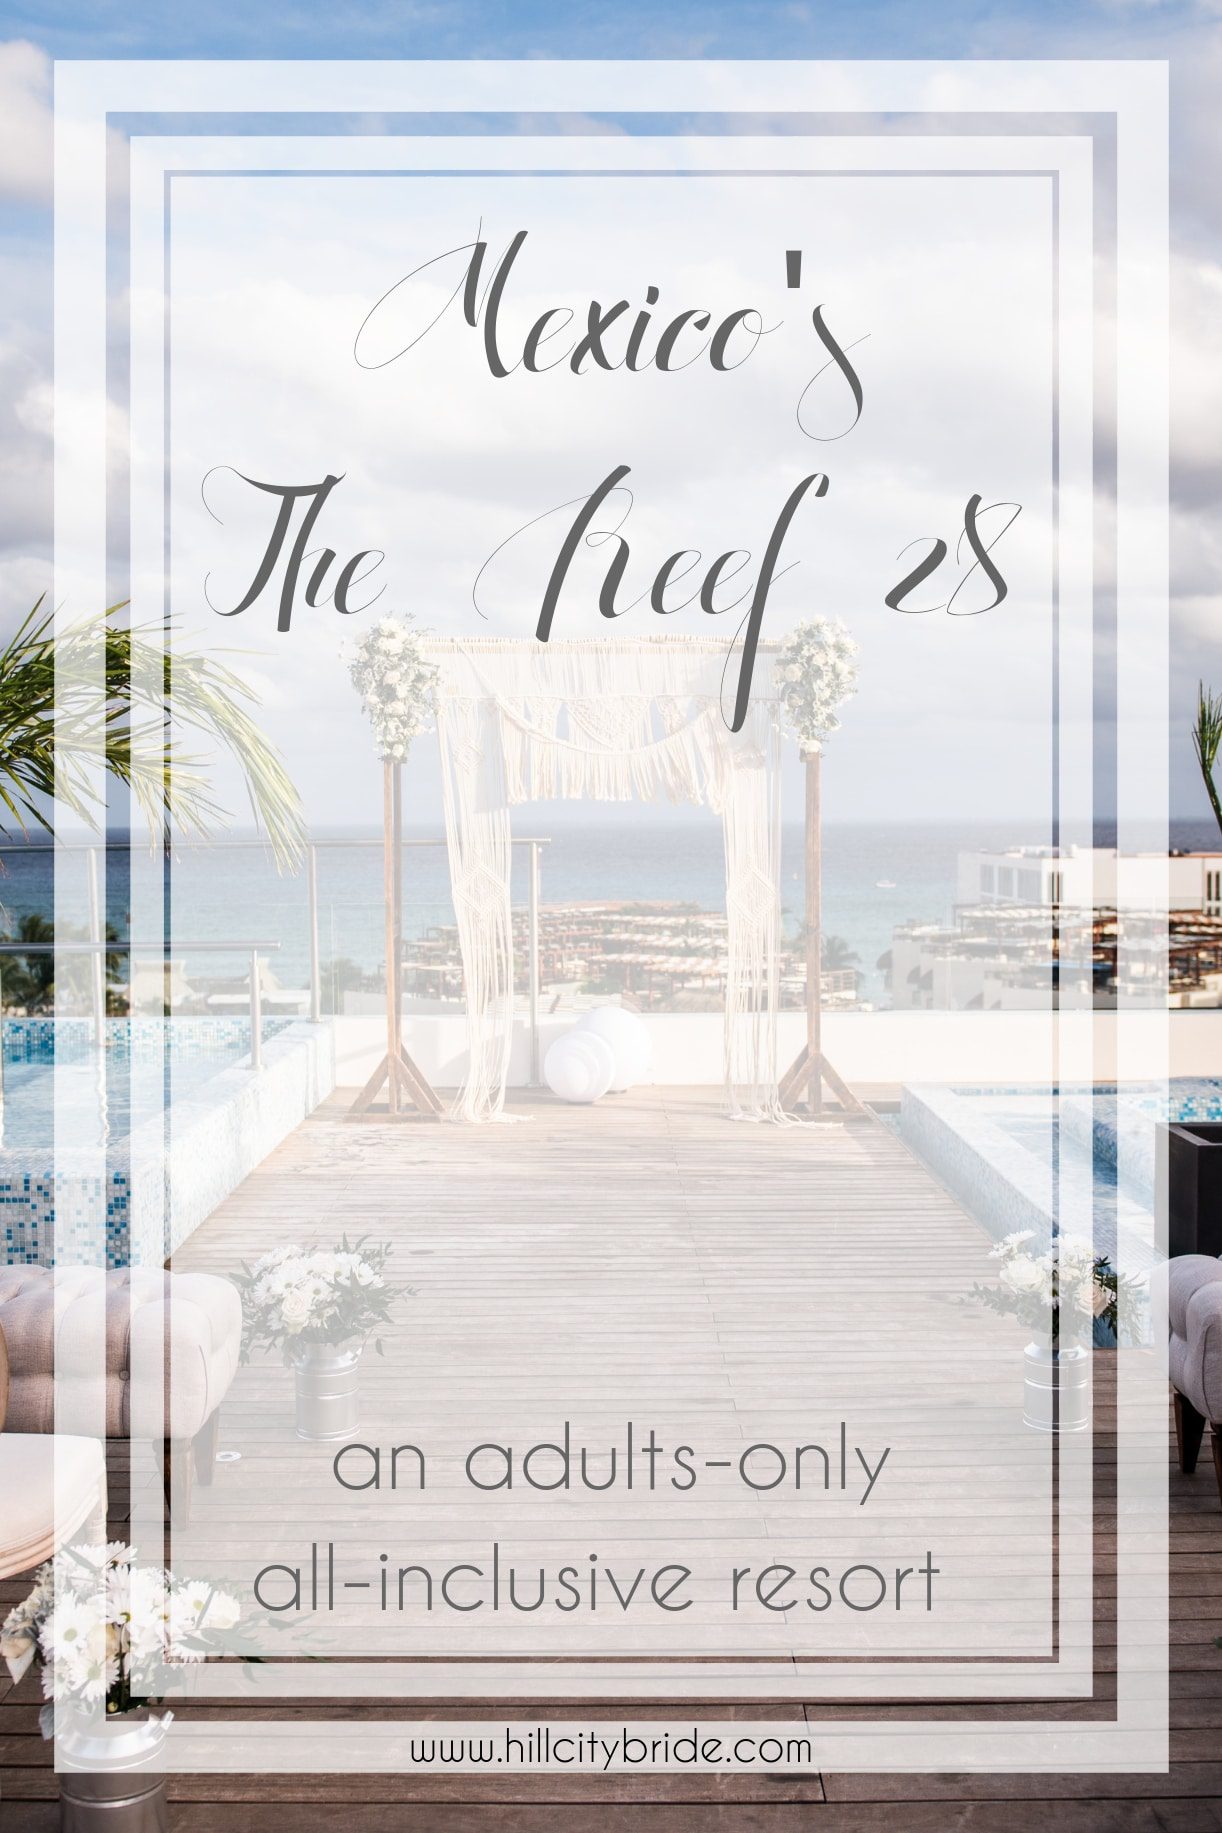 Adults Only All-Inclusive Resort Luxury Mexico The Reef 28 | Hill City Bride Virginia Weddings Destination Wedding Blog Travel Writer